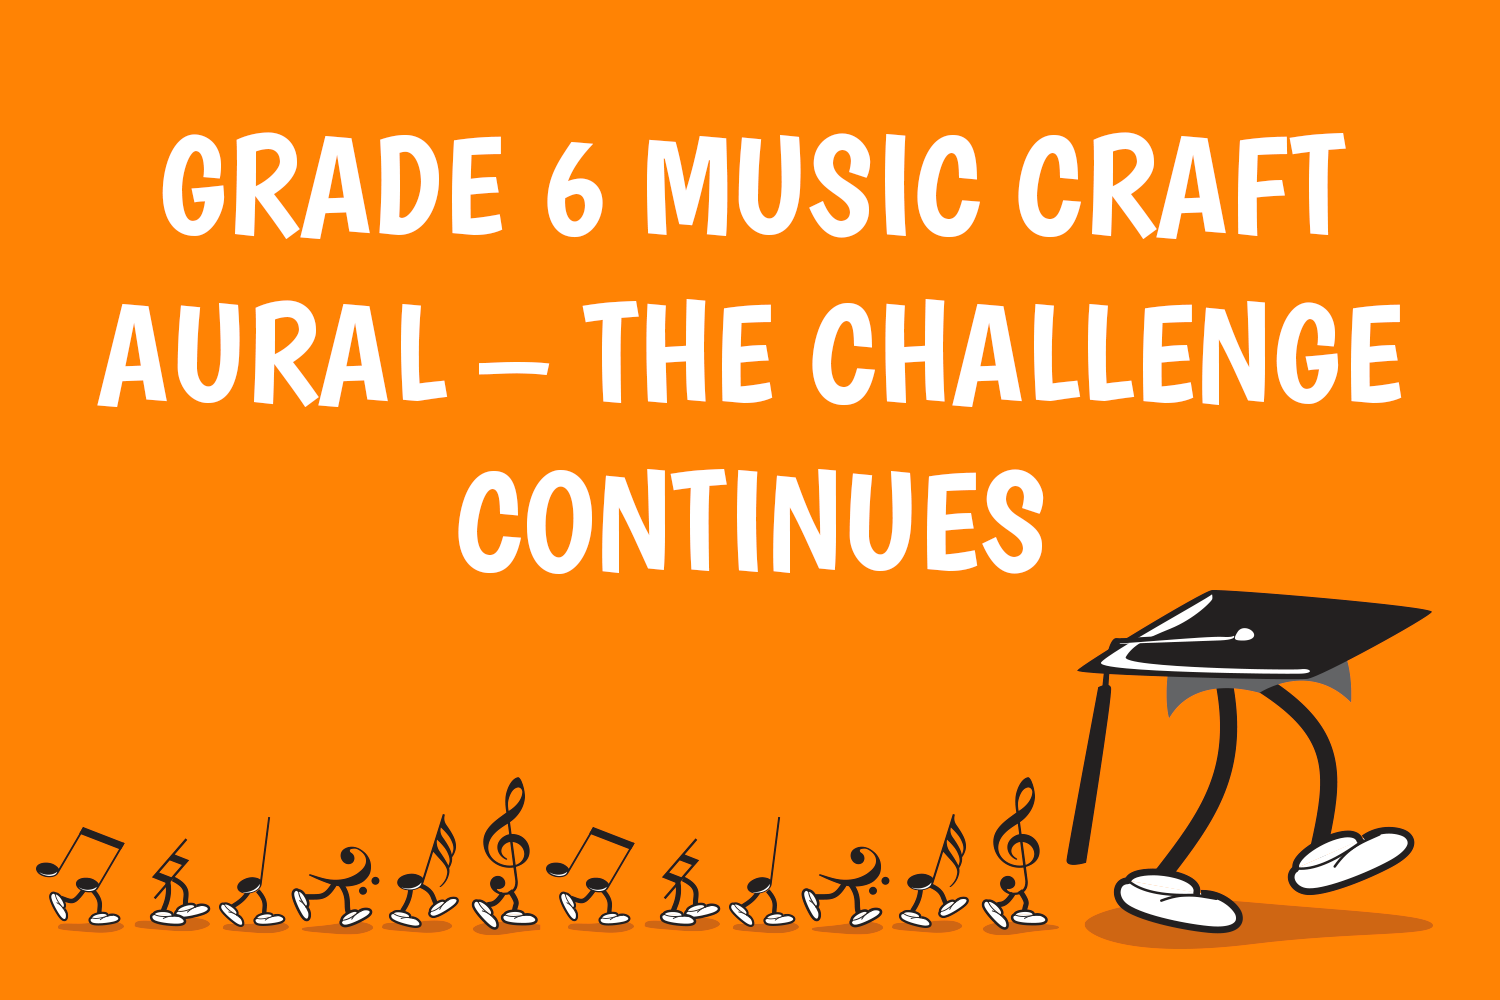 Grade 6 Music Craft Aural - The Challenge Continues